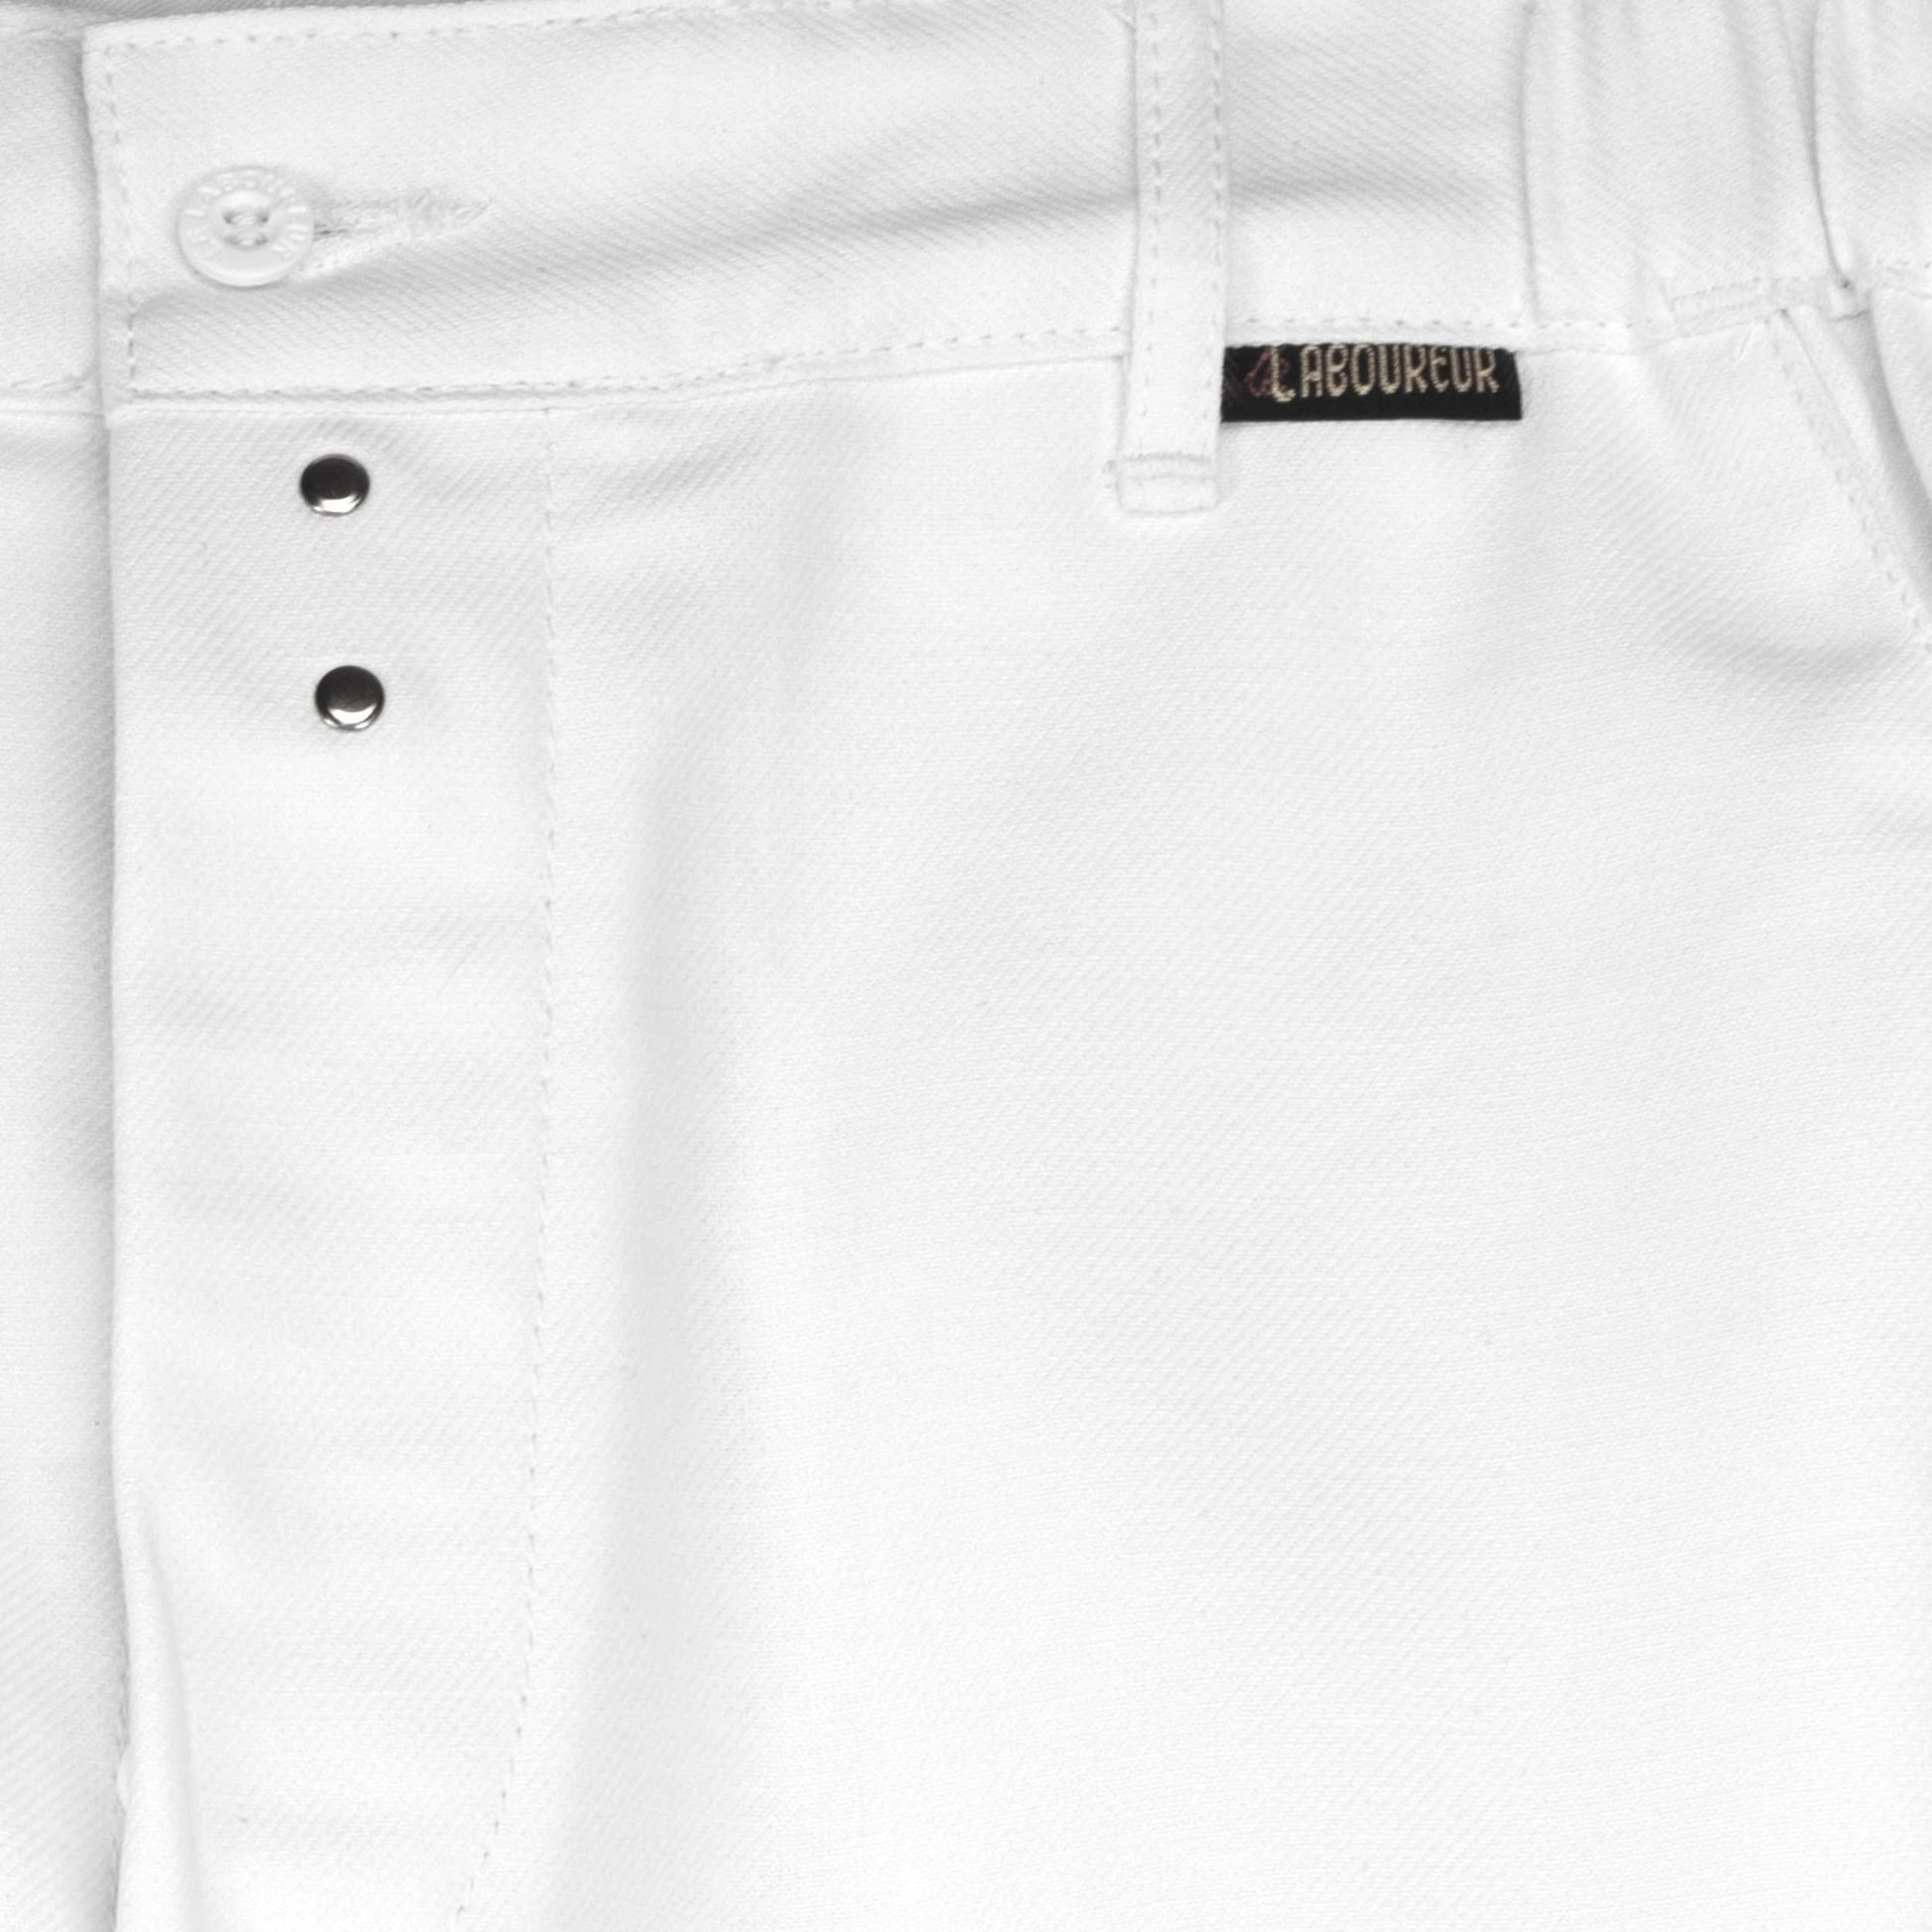 (Sold Out) Le Laboureur French Cotton Work Pant in White